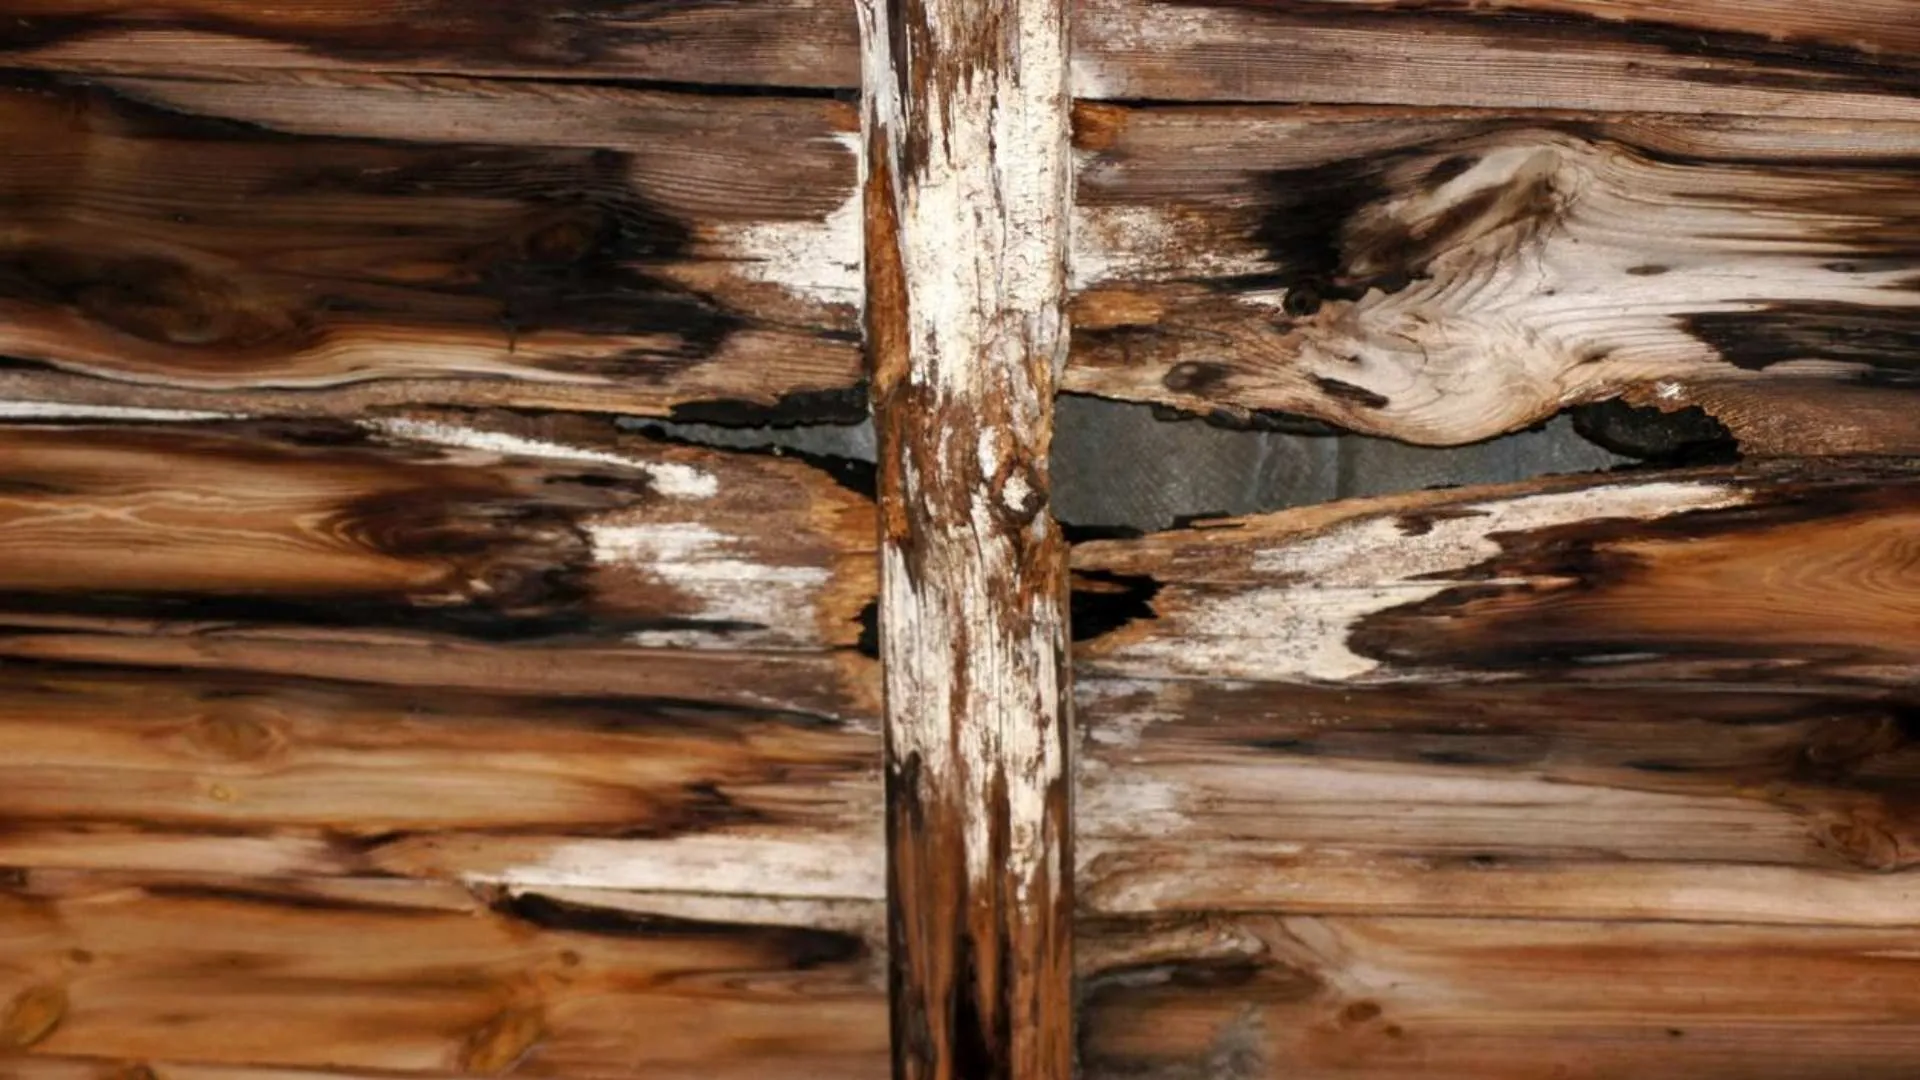 mold and mildew growth on driftwood